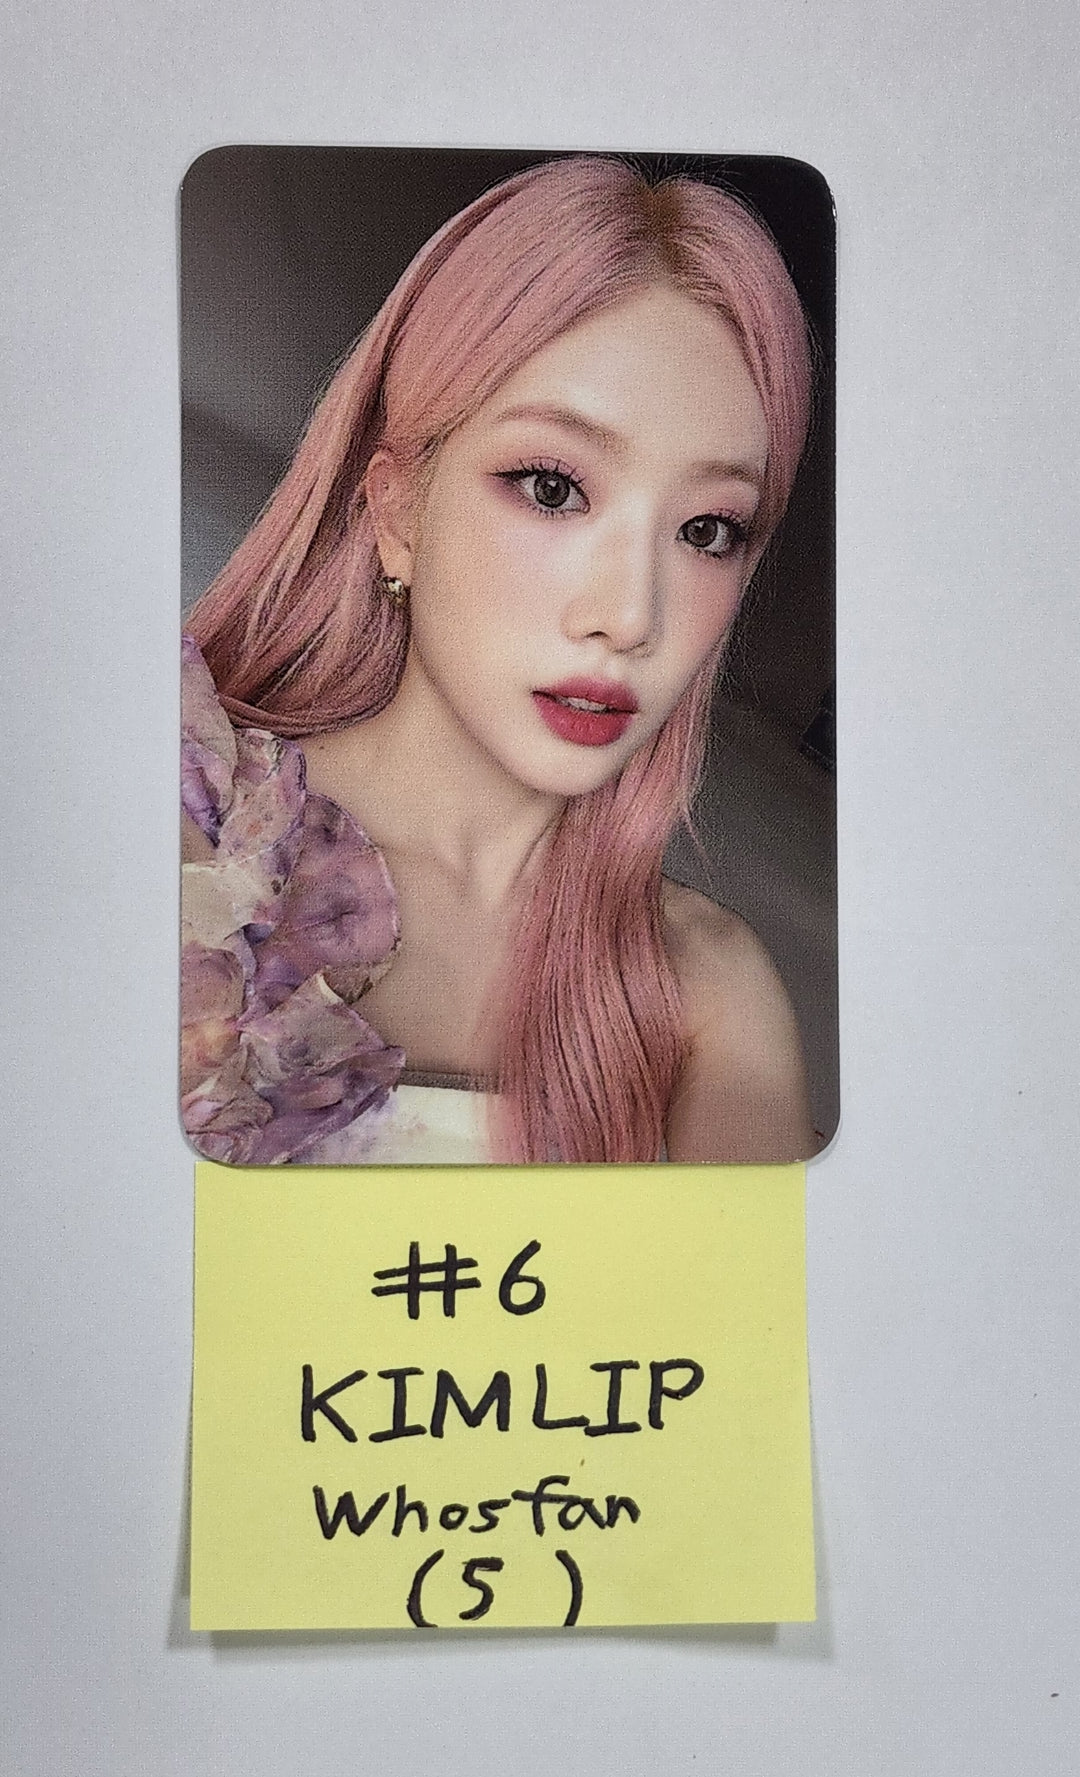 LOONA "Flip That" Summer Special Mini Album - Whos Fan Cafe Luckydraw Event Photocard, 4 x 6 Photo